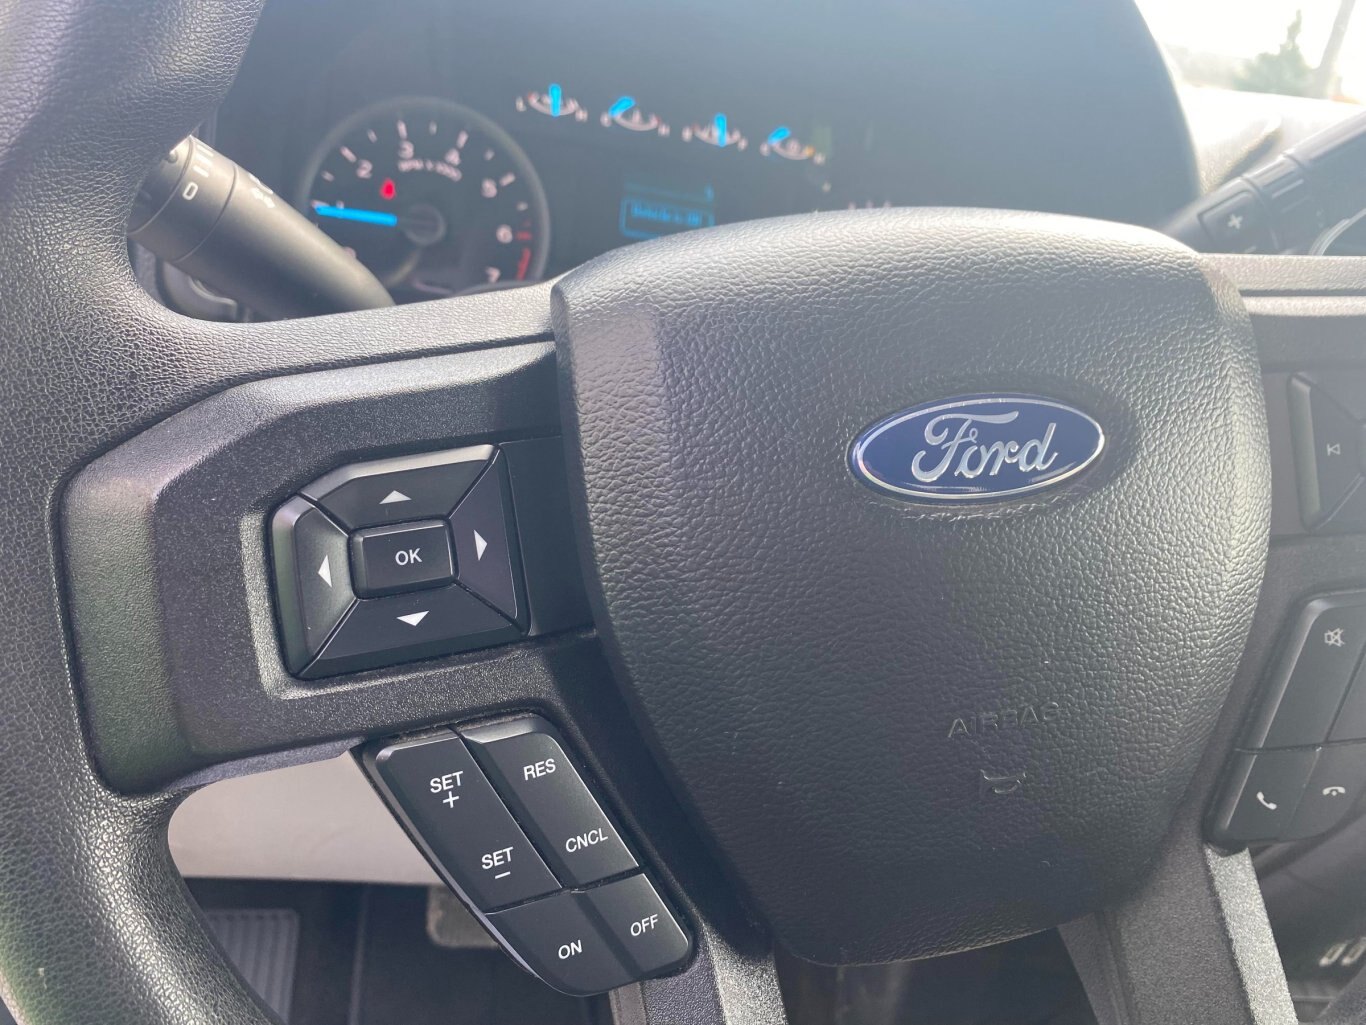 2020 FORD F 150 XLT 4X4 SUPERCREW WITH REAR VIEW CAMERA!! ( PREVIOUS RENTAL )